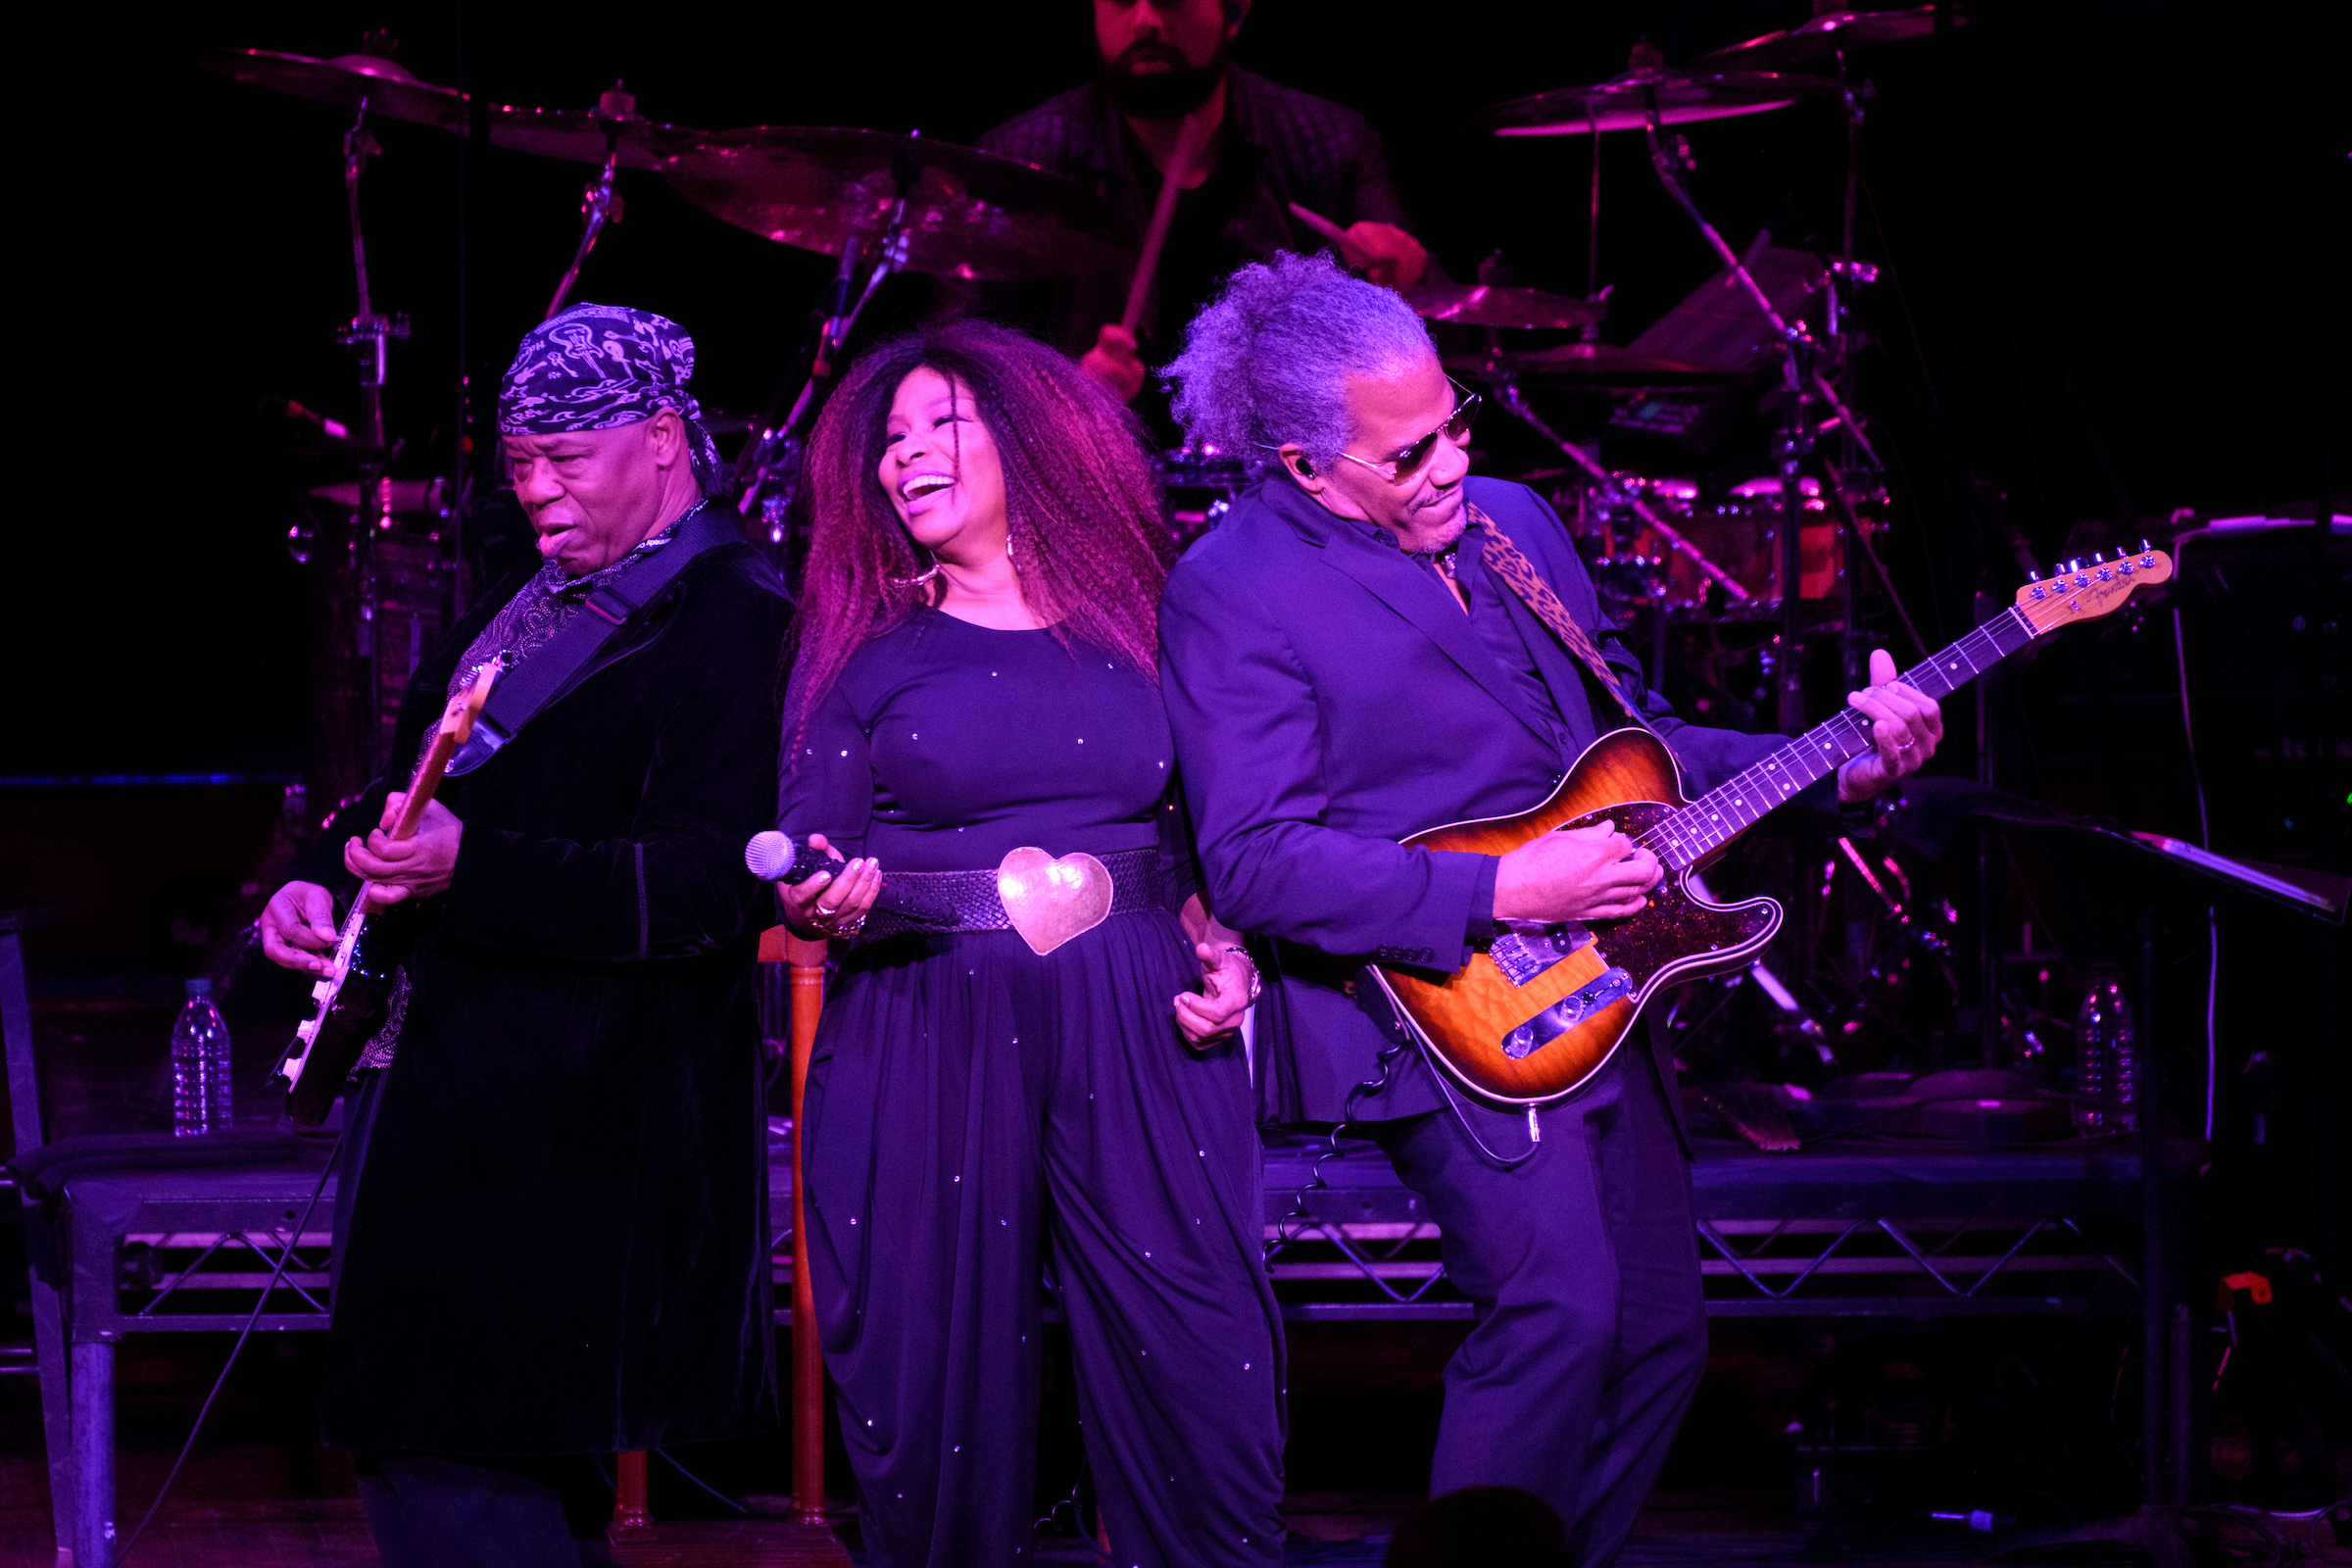 Chaka Khan leans into her guitar and bass players while performing under purple light